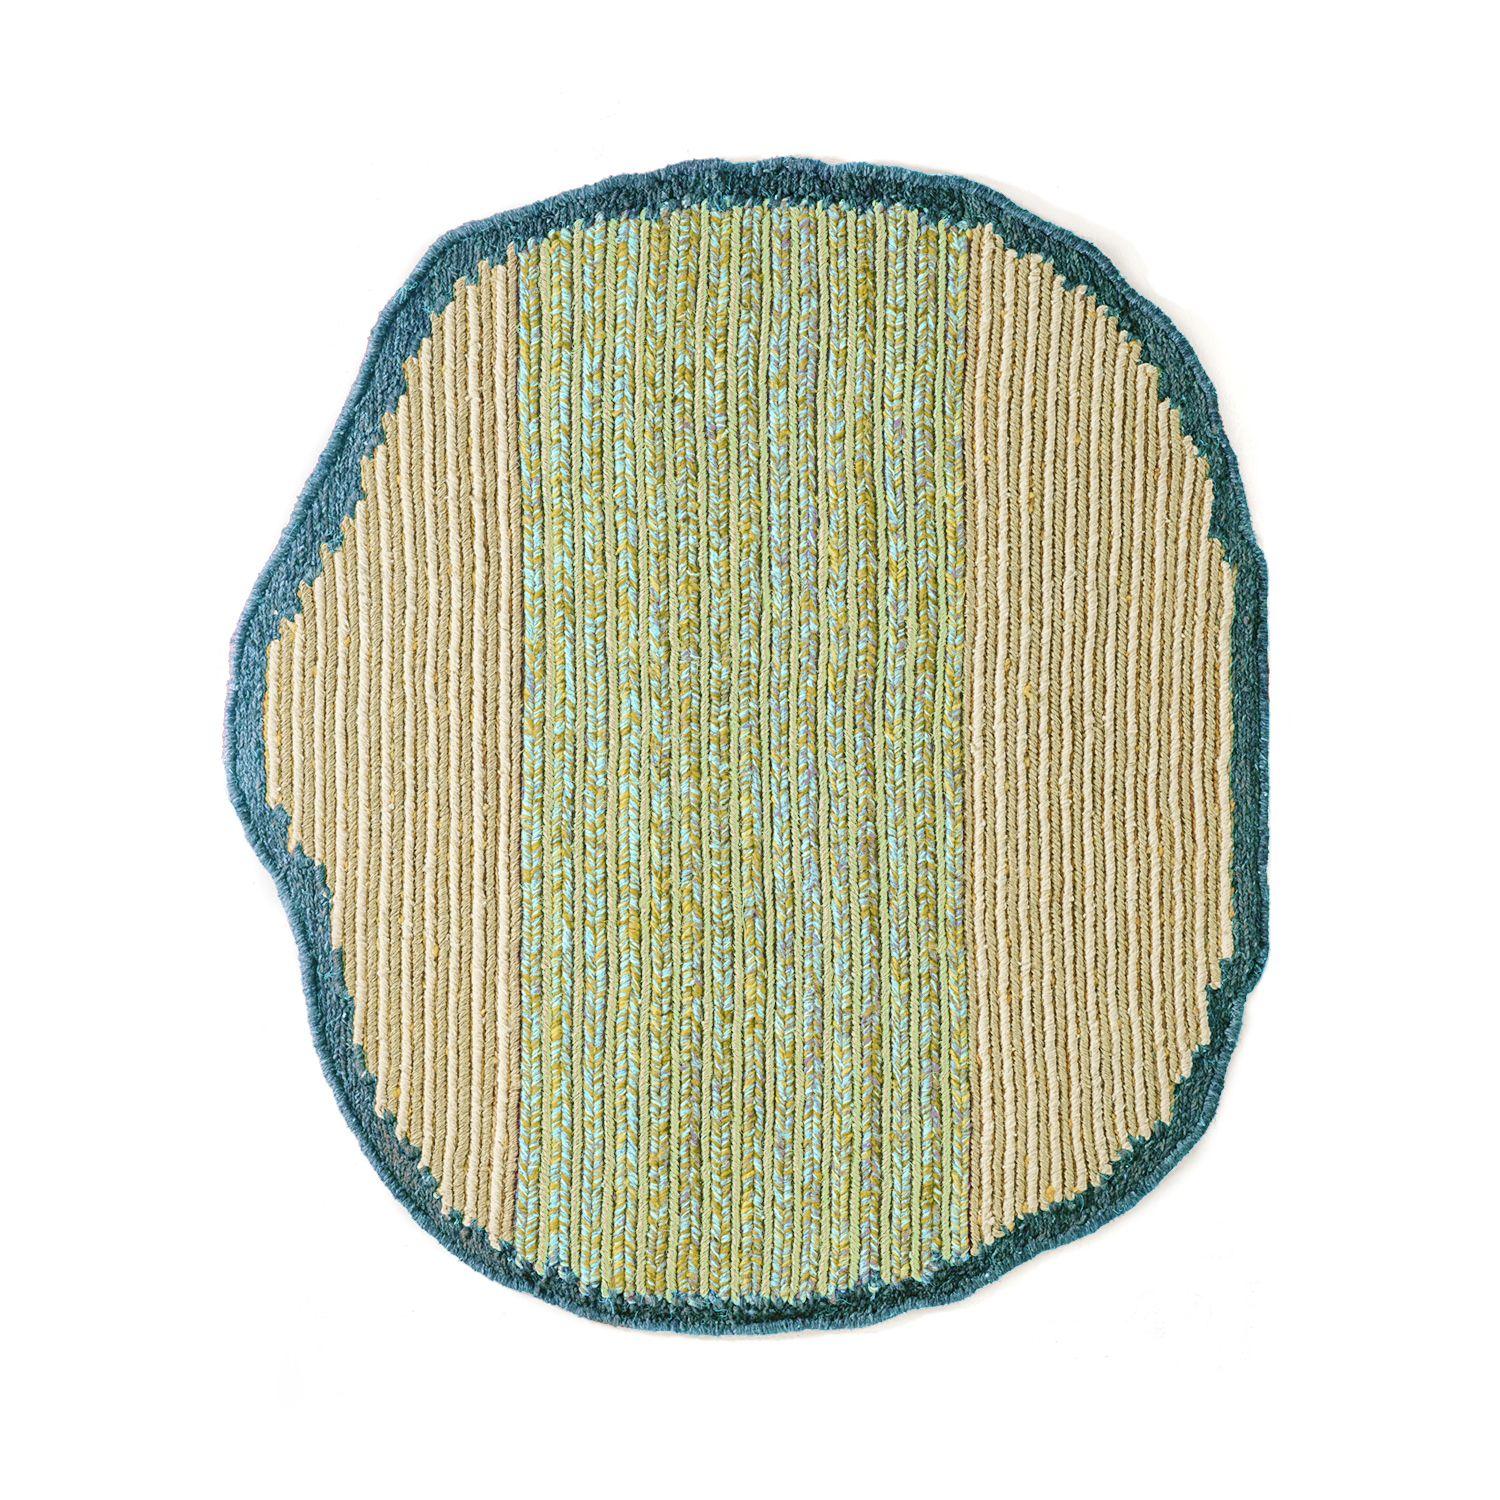 Small uilas rug by Mae Engelgeer
Materials: 100% fique fibers from Furcraea leaves.
Technique: Natural fibers. Hand-woven in Colombia.
Dimensions: W 180 x L 200 cm 
Available in colors: Terra/ sand/ viola, lavanda/ blue lila/ vino, musgo/